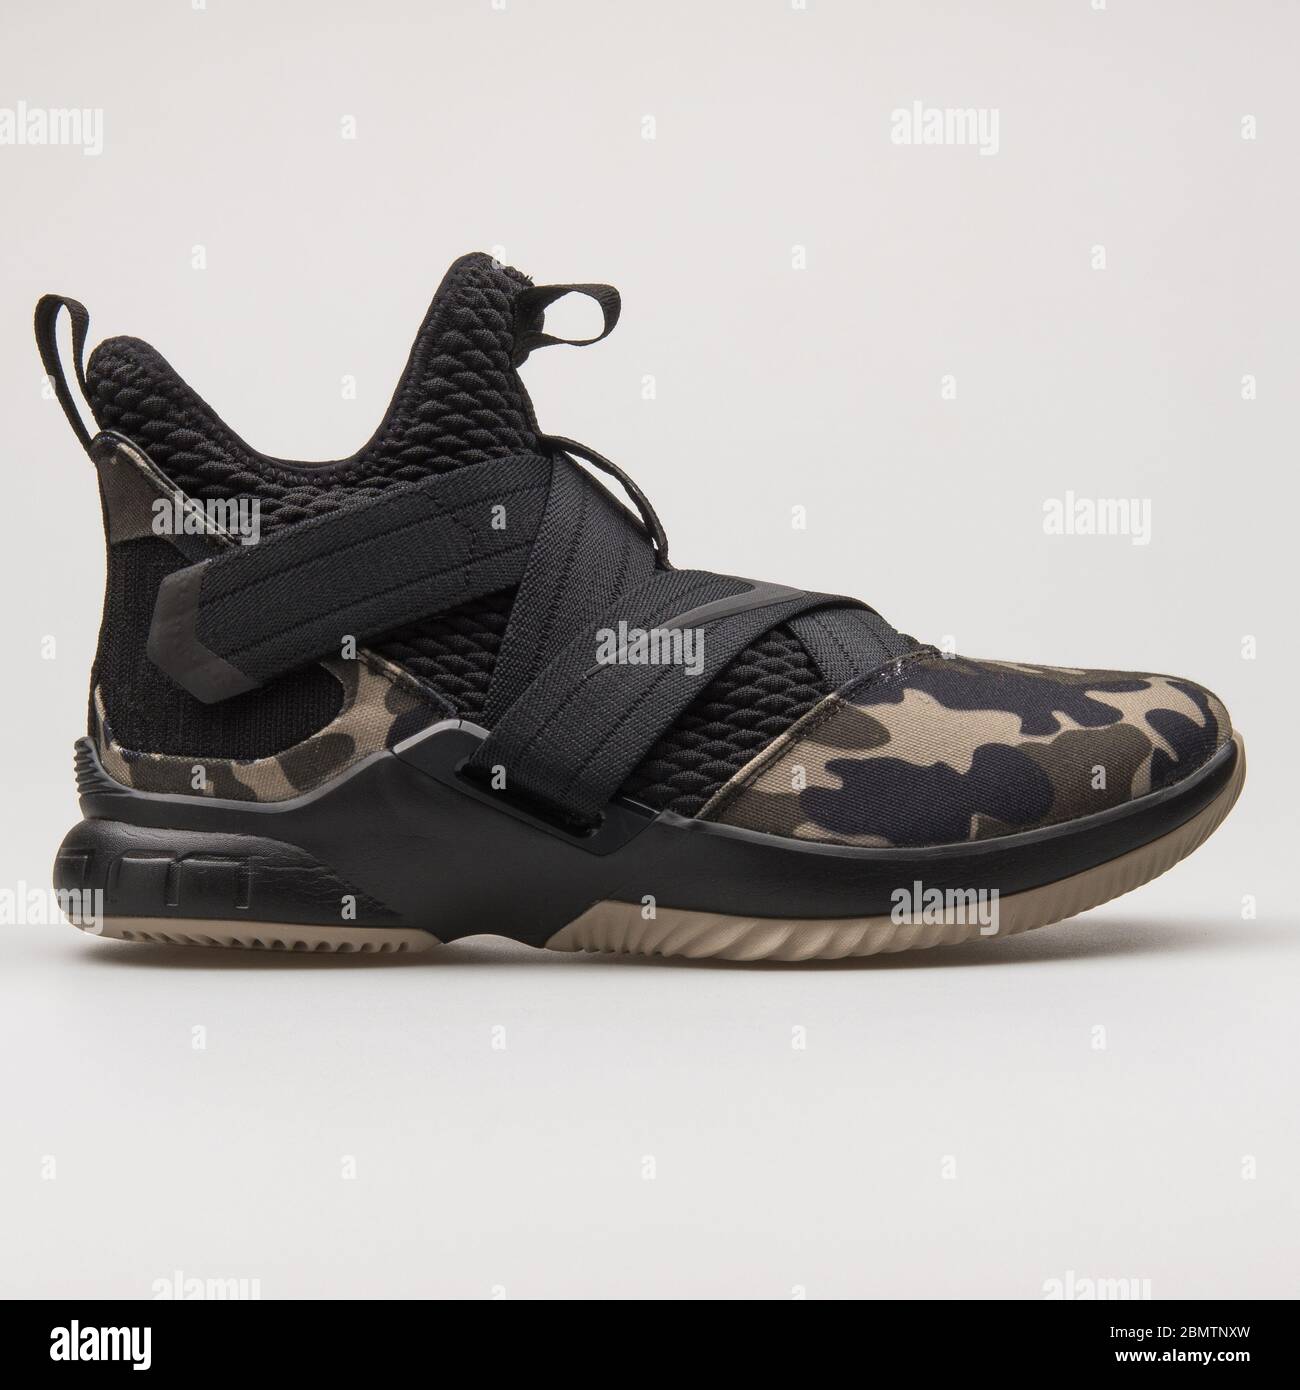 VIENNA, AUSTRIA - FEBRUARY 19, 2018: Nike Lebron Soldier 12 SFG black and  camouflage sneaker on white background Stock Photo - Alamy